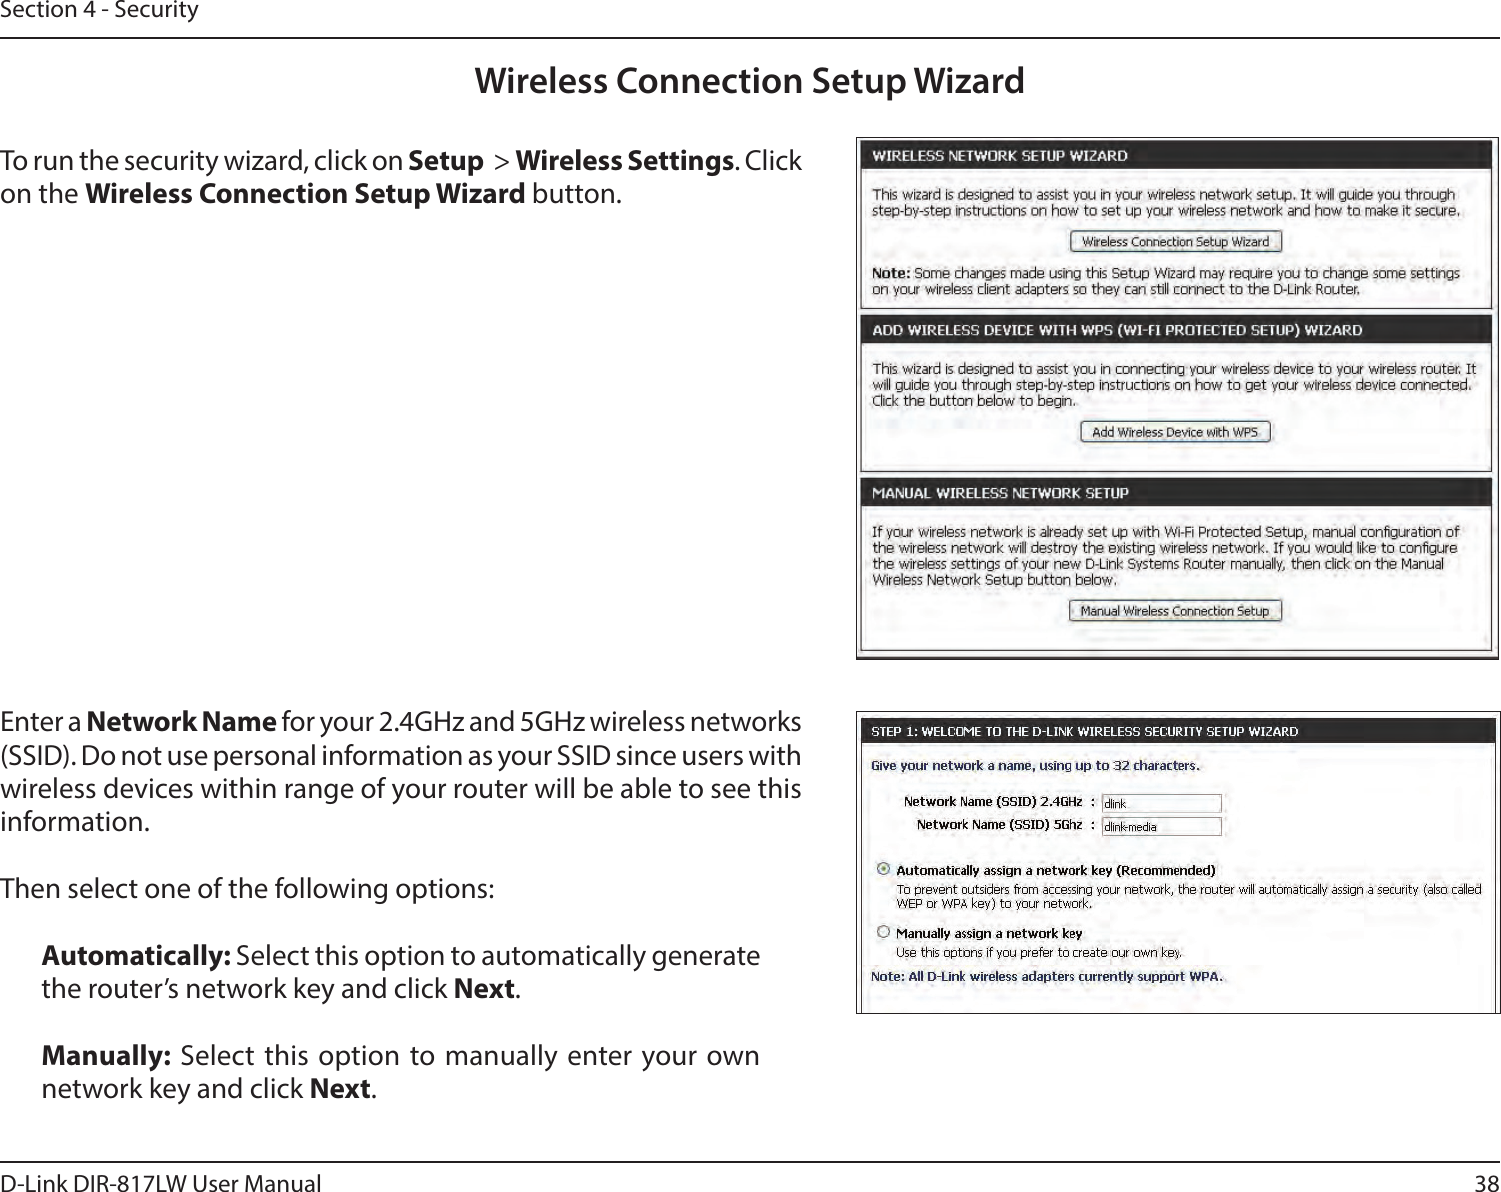 38D-Link DIR-817LW User ManualSection 4 - SecurityWireless Connection Setup WizardTo run the security wizard, click on Setup  &gt; Wireless Settings. Click on the Wireless Connection Setup Wizard button.Enter a Network Name for your 2.4GHz and 5GHz wireless networks (SSID). Do not use personal information as your SSID since users with wireless devices within range of your router will be able to see this information.Then select one of the following options: Automatically: Select this option to automatically generate the router’s network key and click Next.Manually: Select this option to manually enter your own network key and click Next.